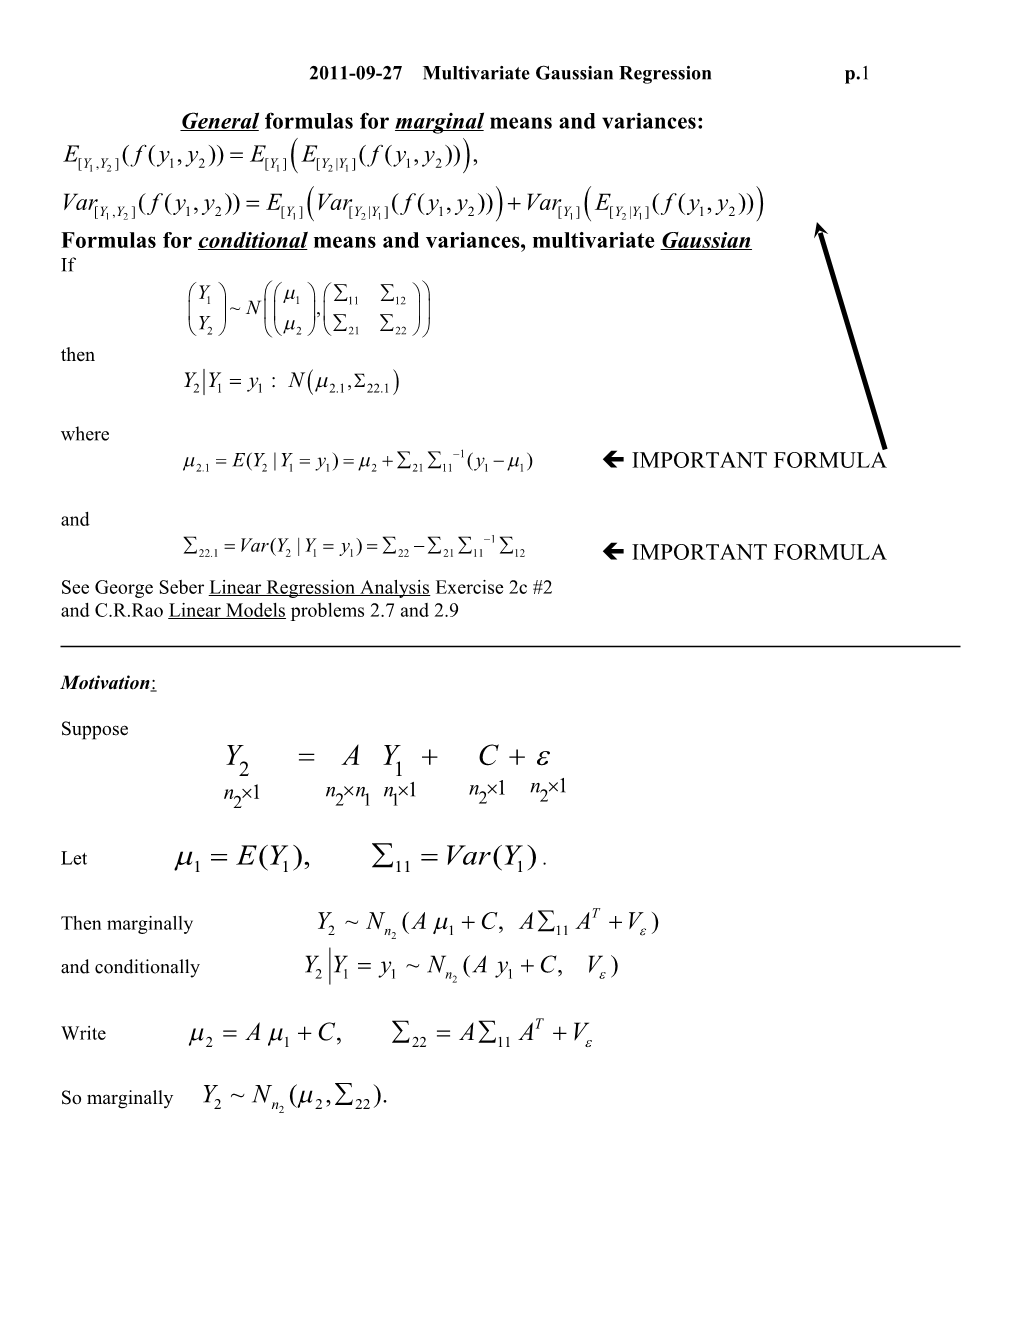 Formulas Forconditional Means and Variances, Multivariate Gaussian